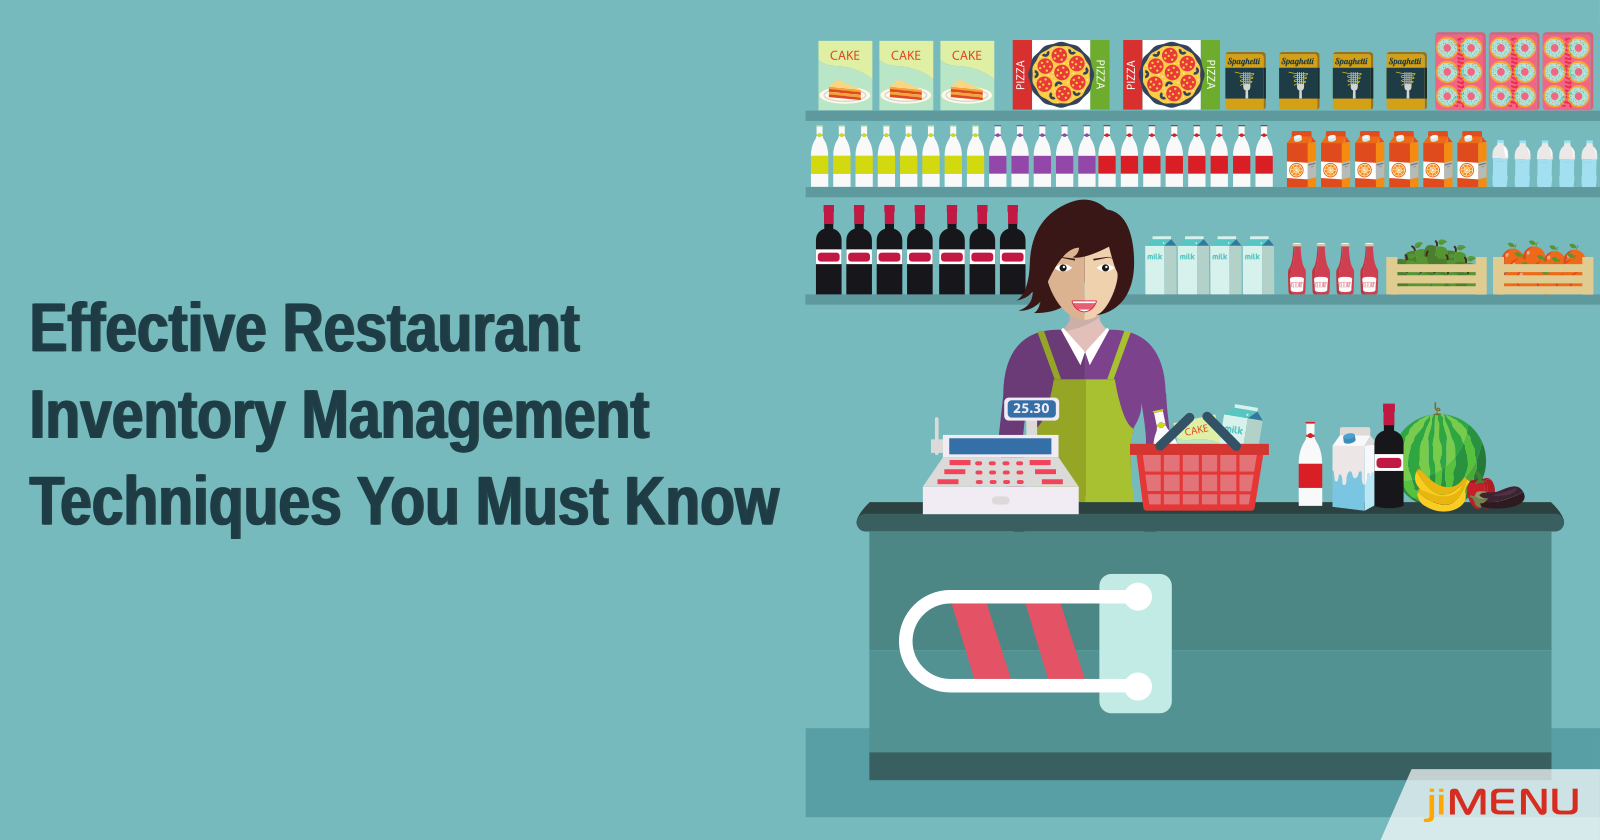 Signs You Need To Change Your Restaurant Inventory Management System